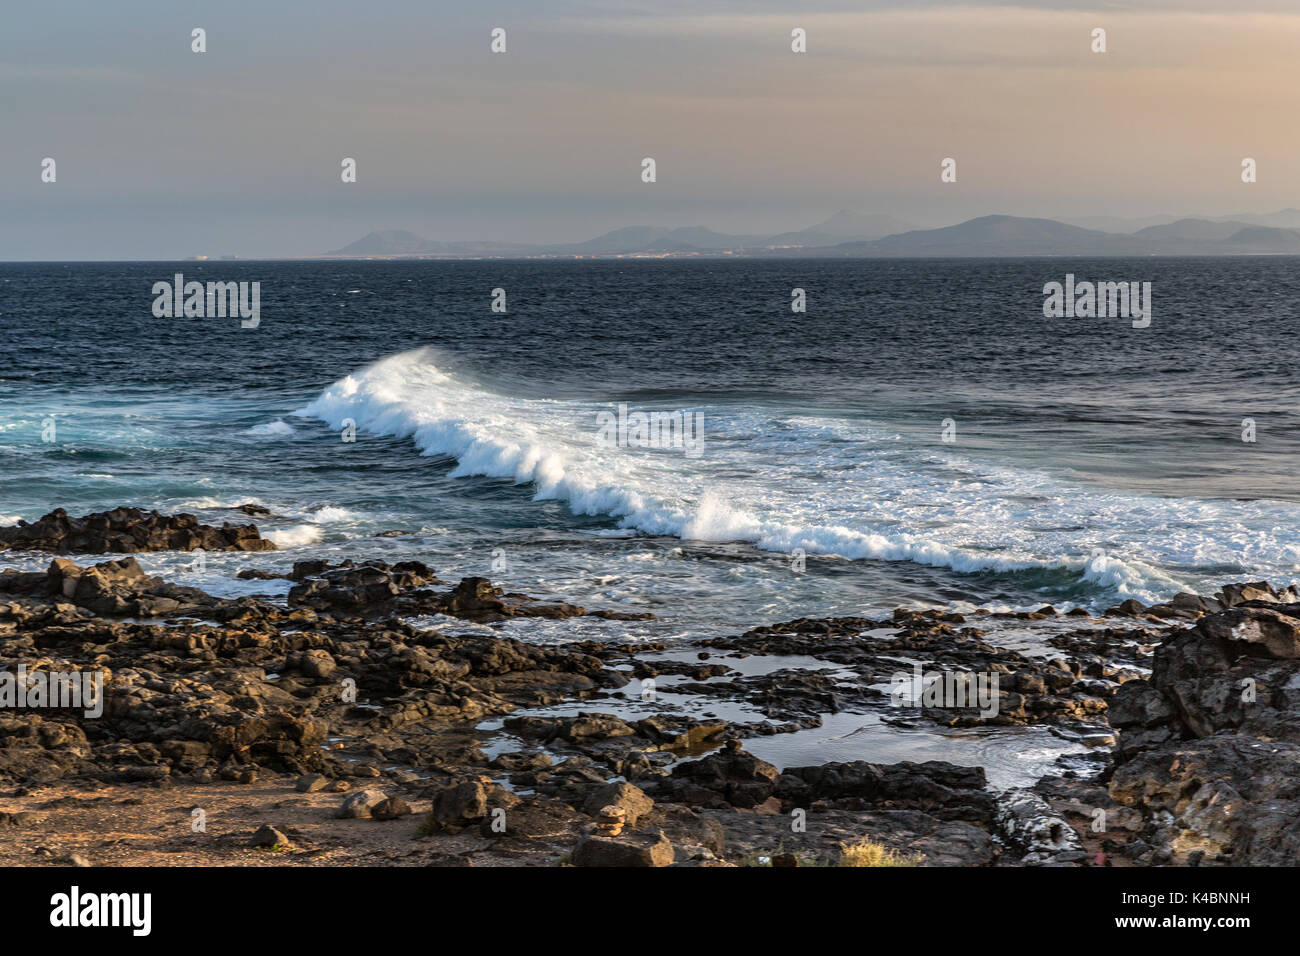 Waves On The Cliff At Punta Pechiguera Near Playa Blanca For Sunset, Long Exposure, Lanzarotes, Canaries, Spain, Europe Stock Photo